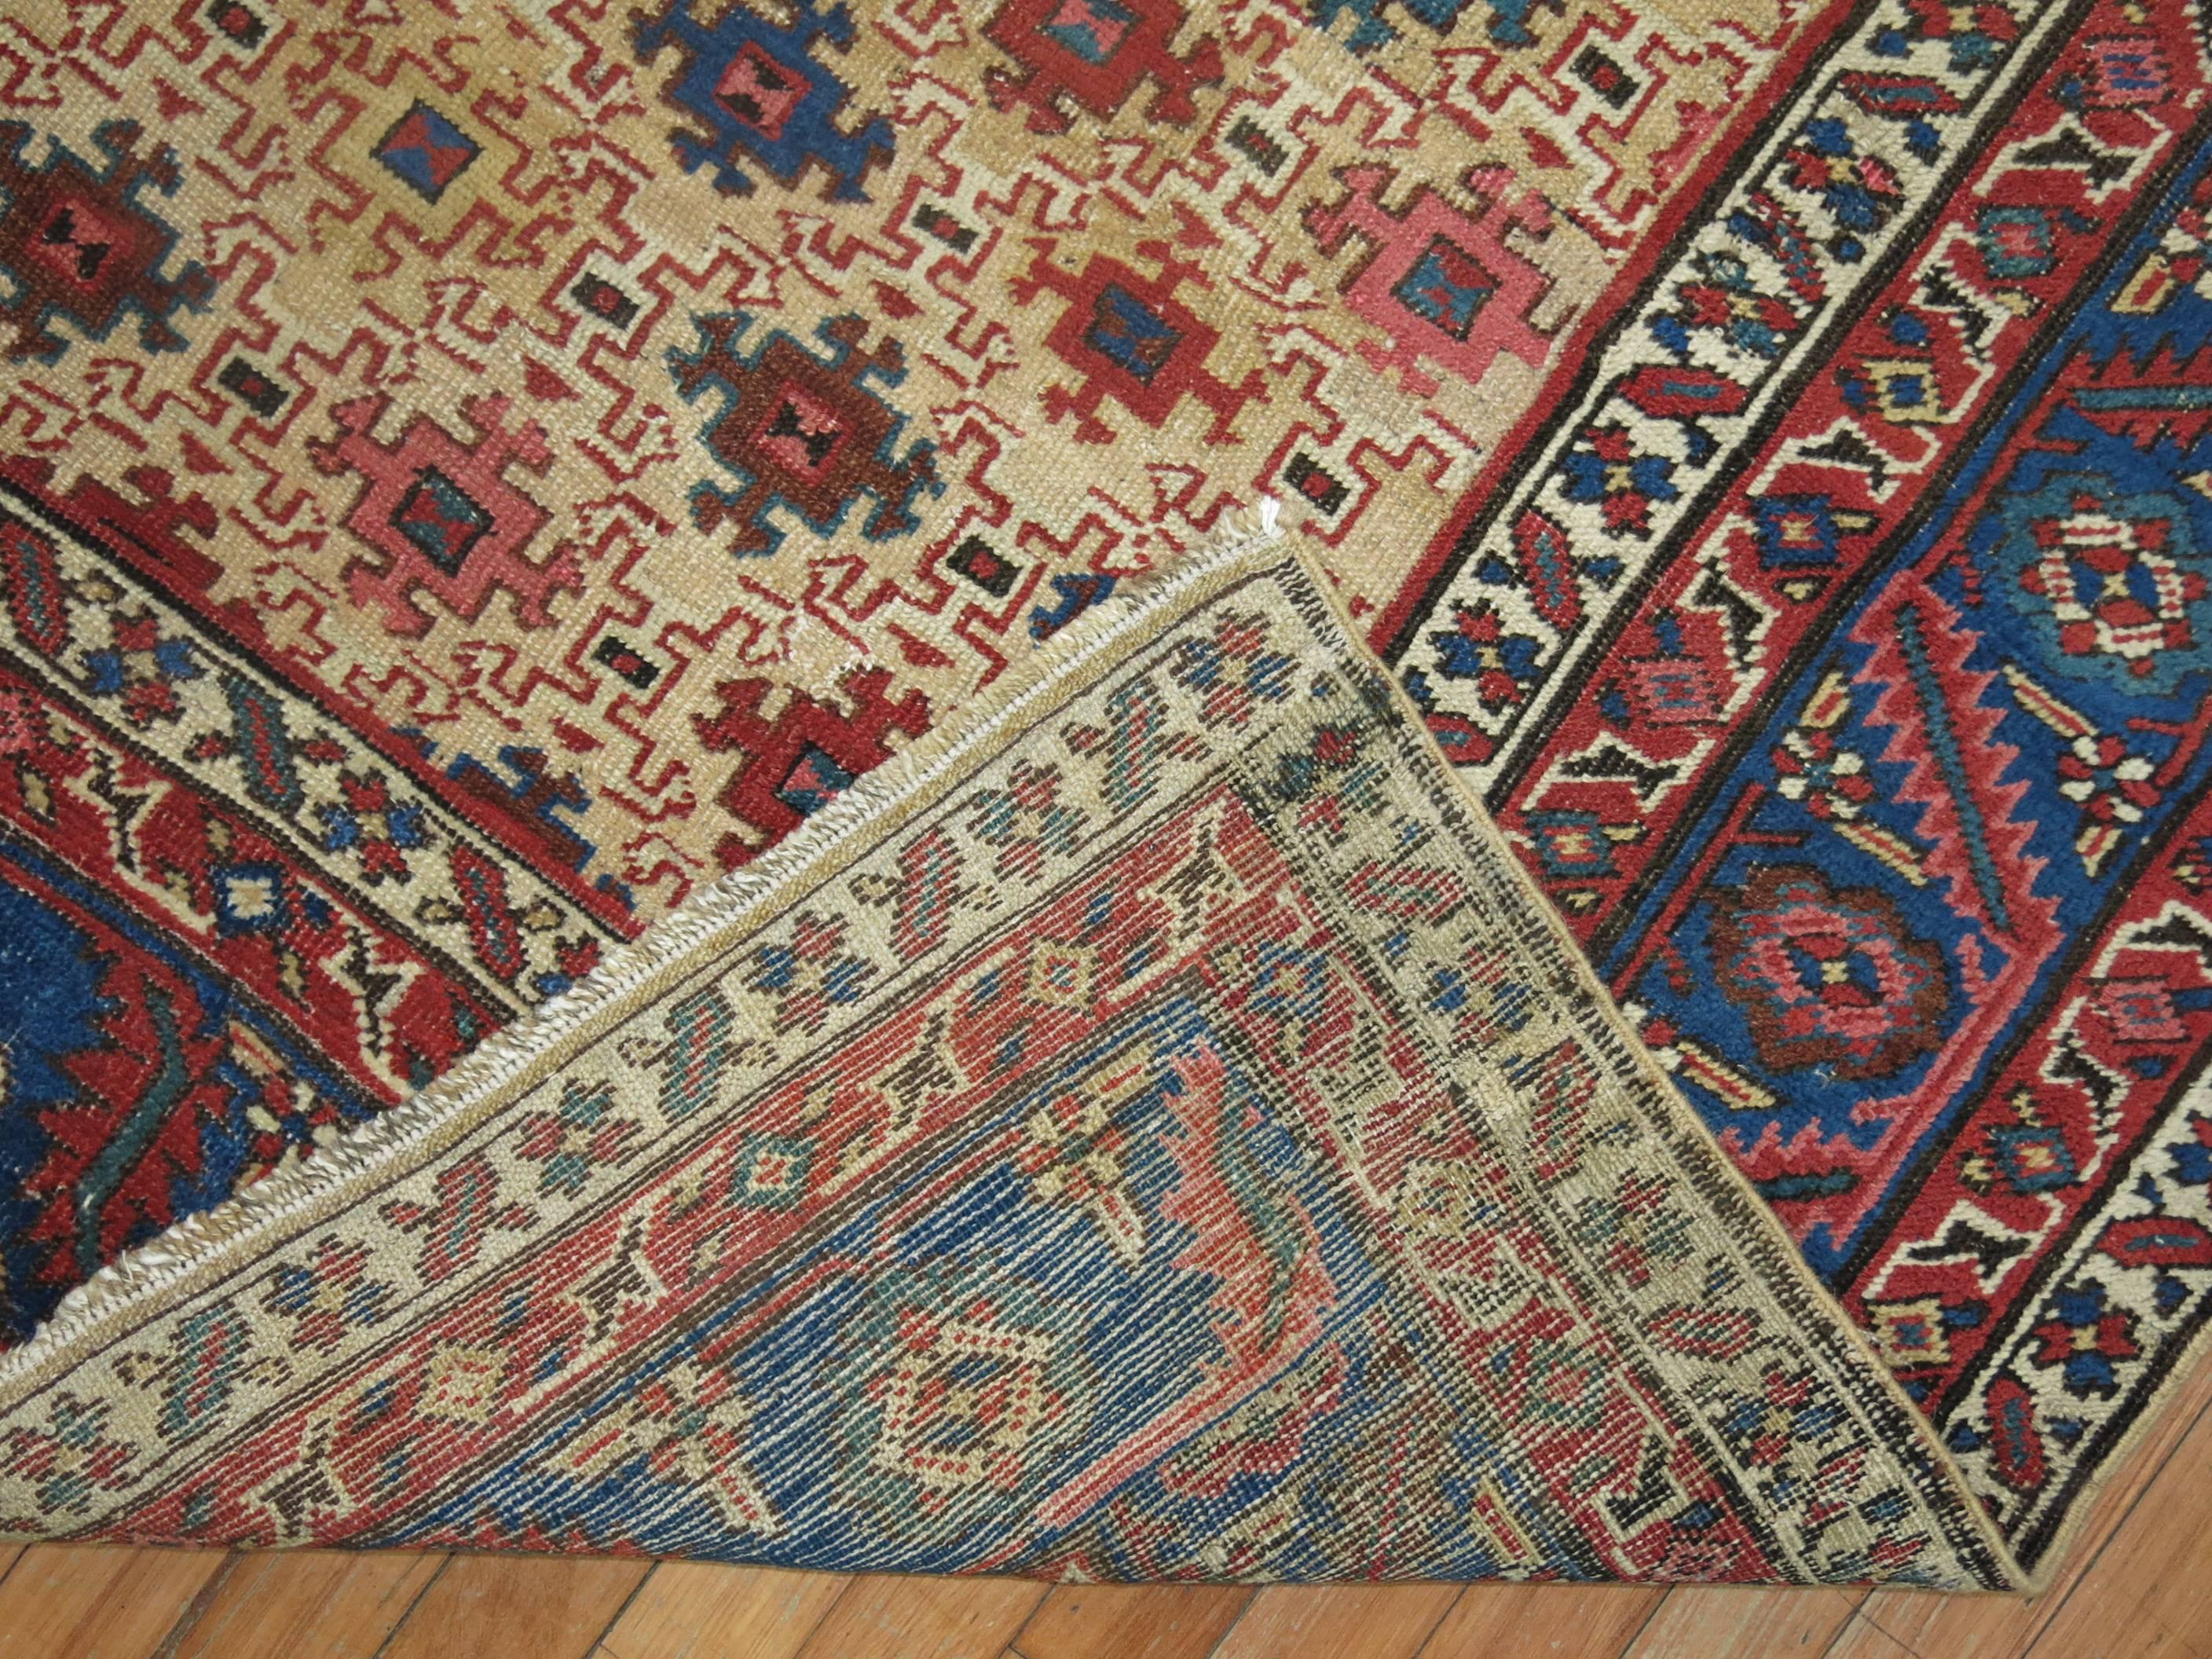 Antique Persian Square Bakshaish Rug In Excellent Condition For Sale In New York, NY